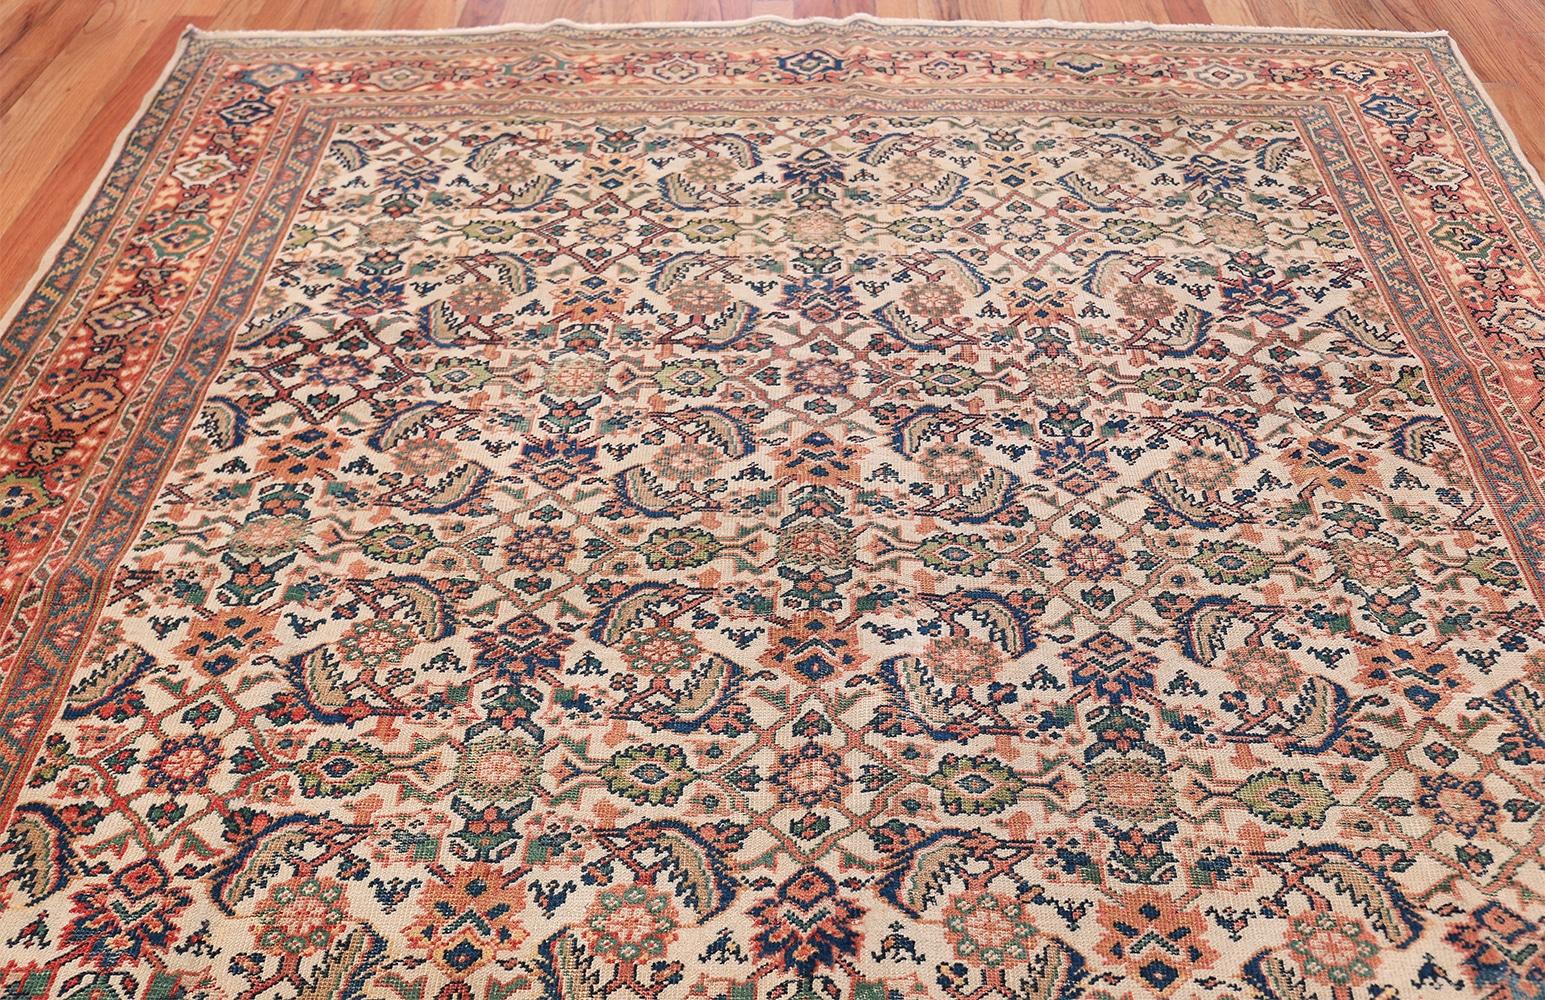 Antique Persian Sultanabad Carpet. Size: 8 ft x 10 ft 7 in (2.44 m x 3.23 m) 3